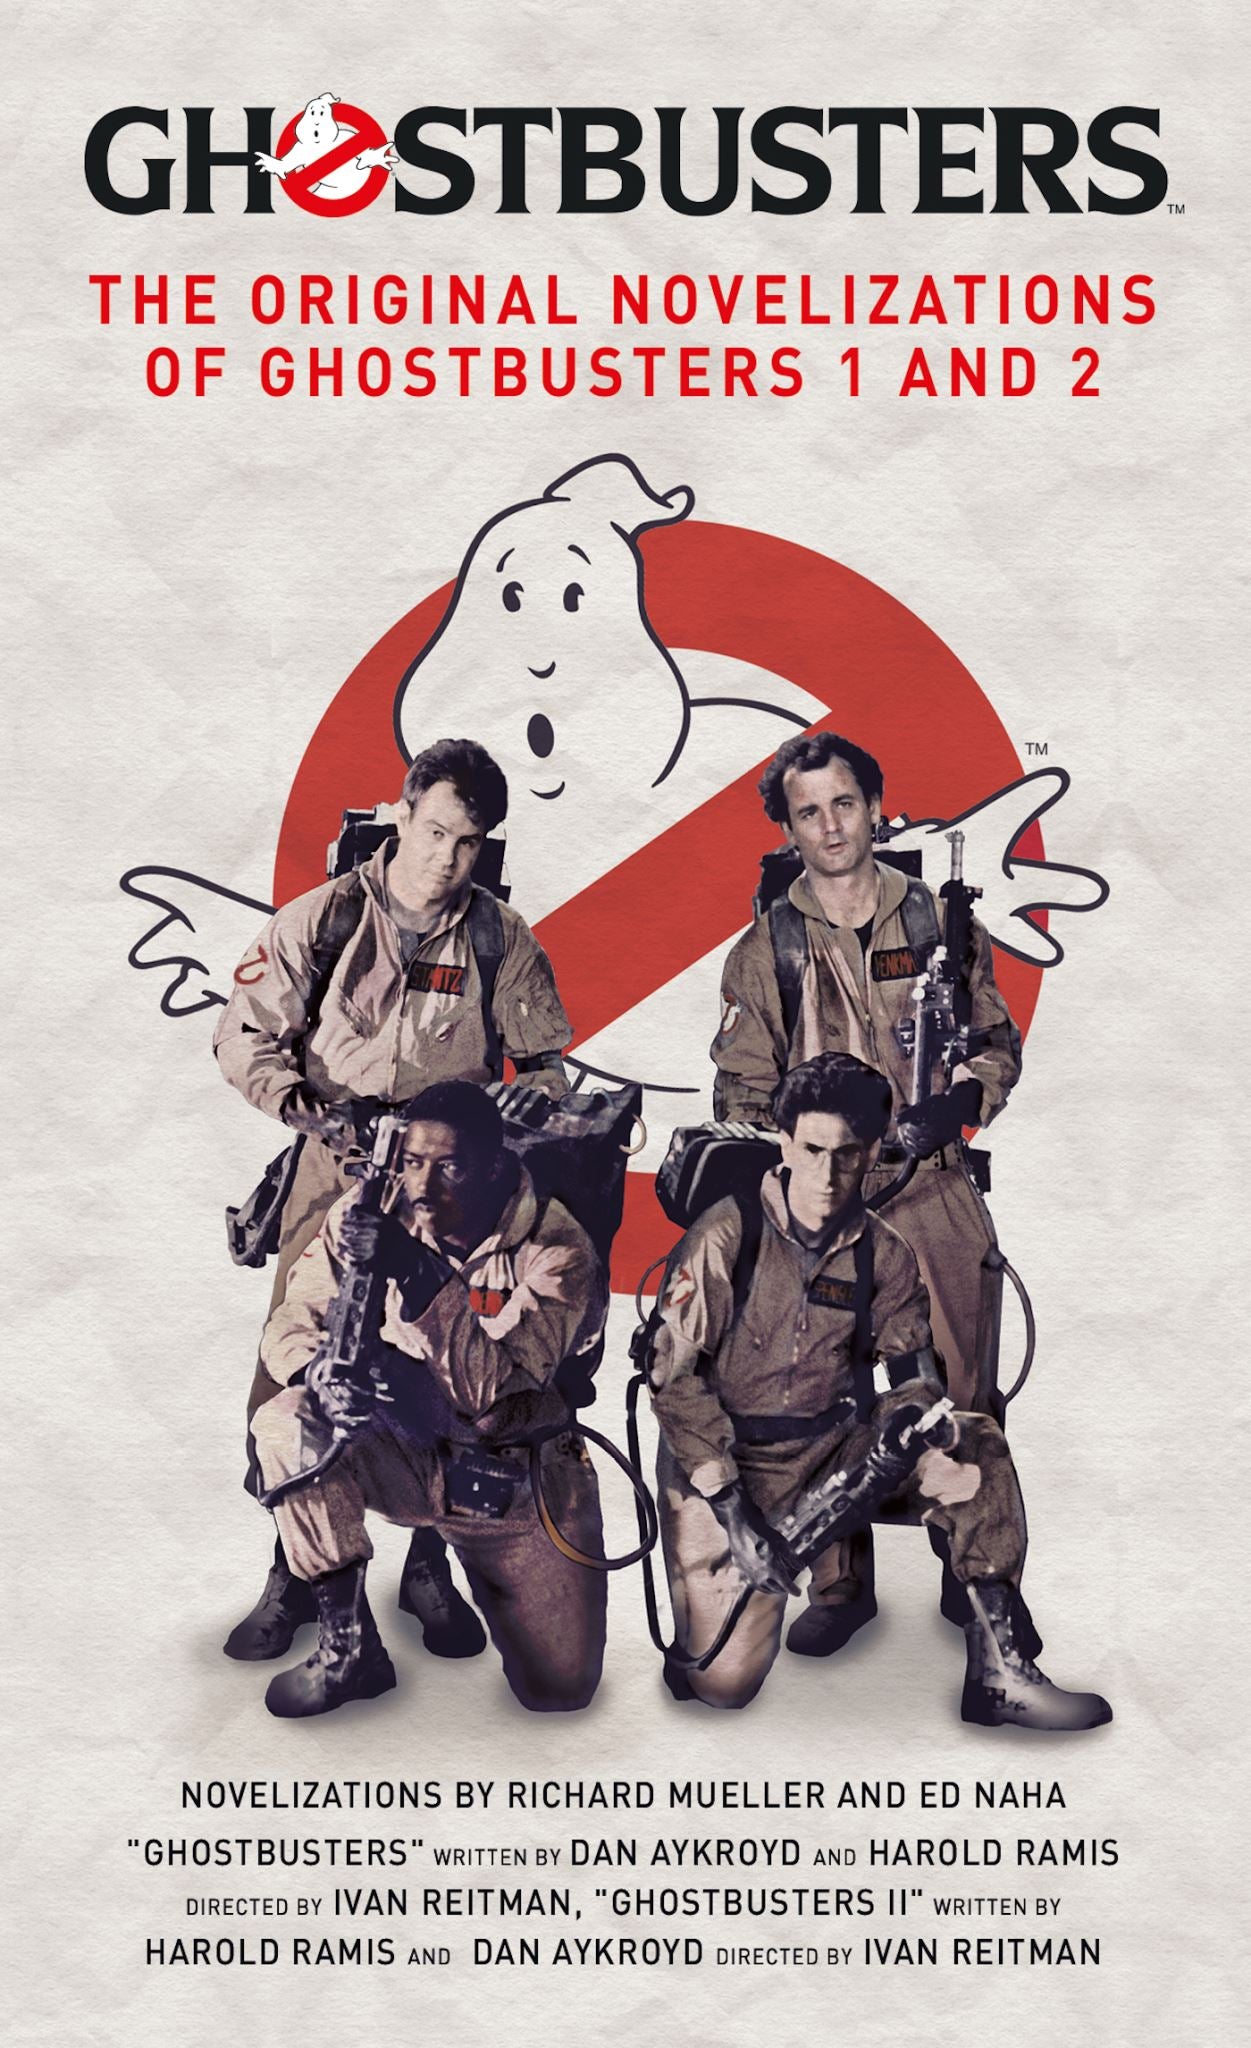 Ghostbusters, The Original Novelizations of Ghostbusters 1 And 2